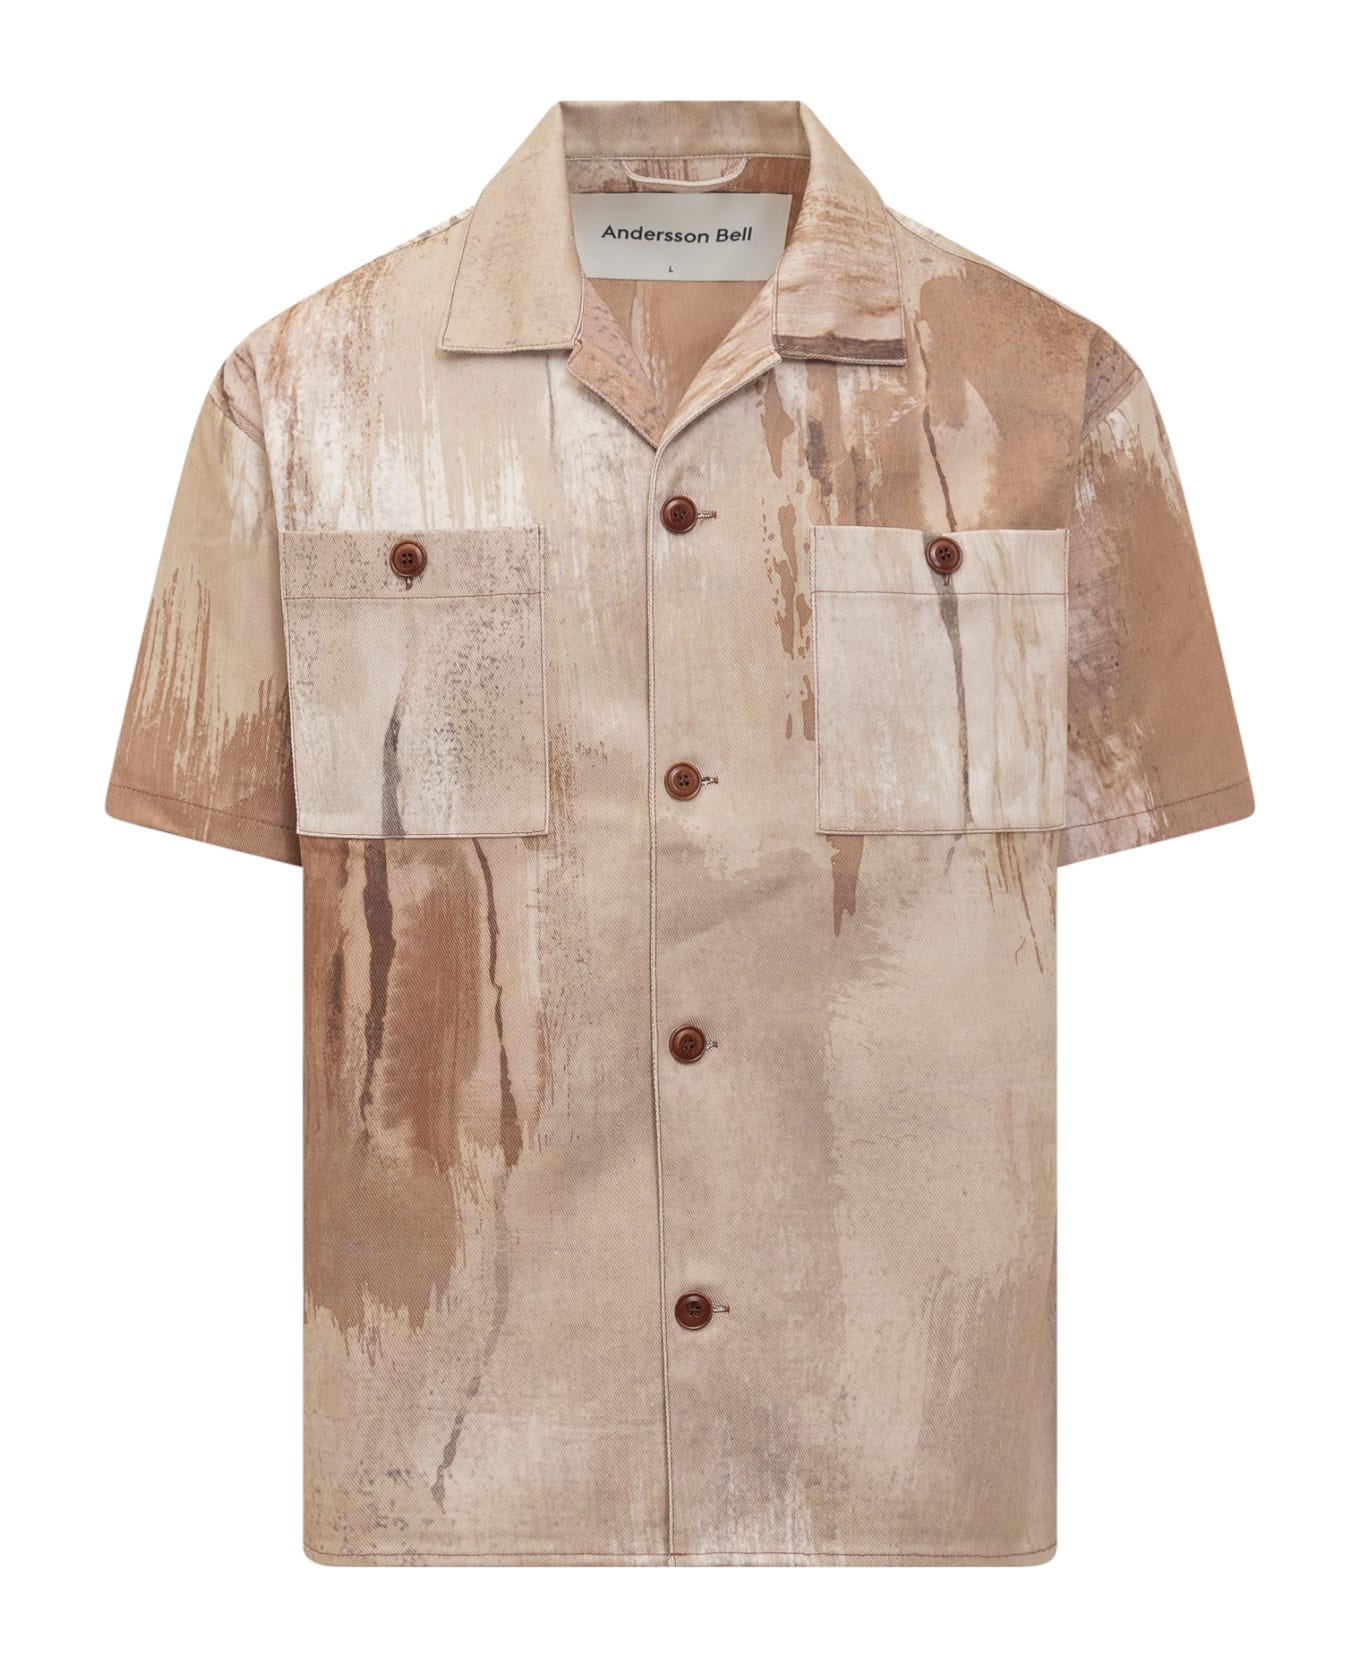 Andersson Bell Tie Dye Shirt - SAND シャツ